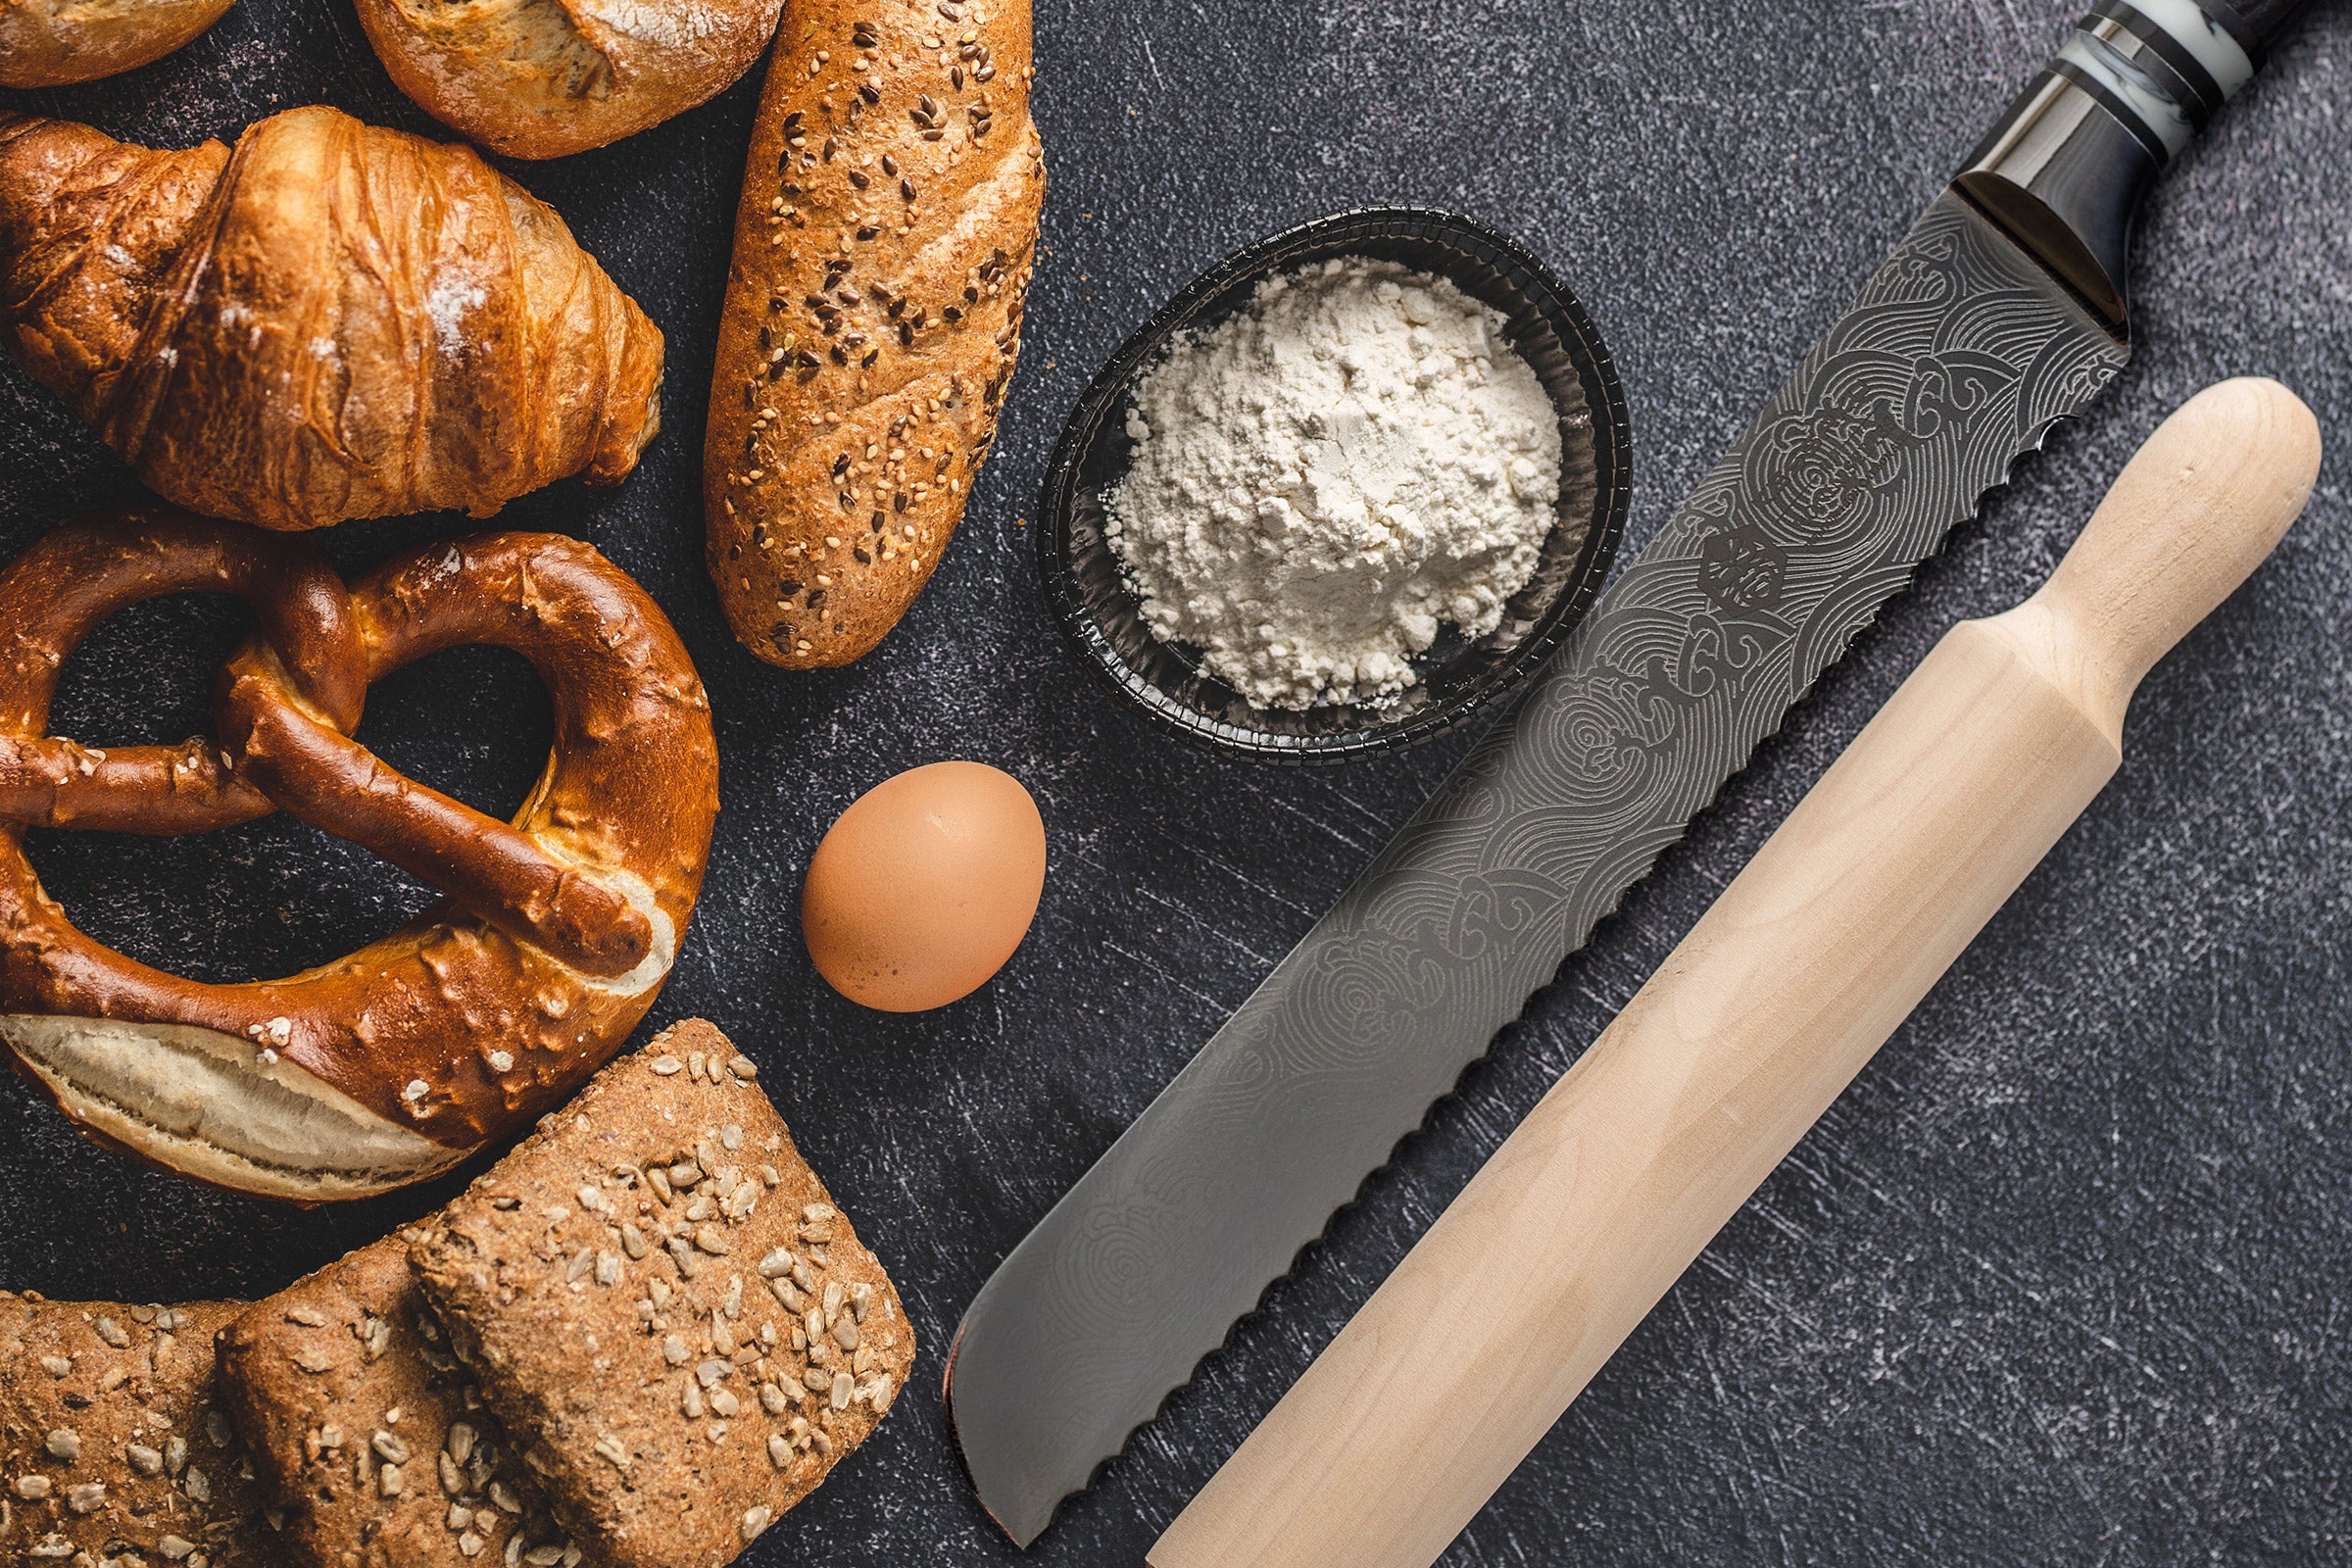 The Ronin Bread Knife next to a rolling pin, cup of flour, egg, whole grain breads, homemade pretzel, and croissants. 